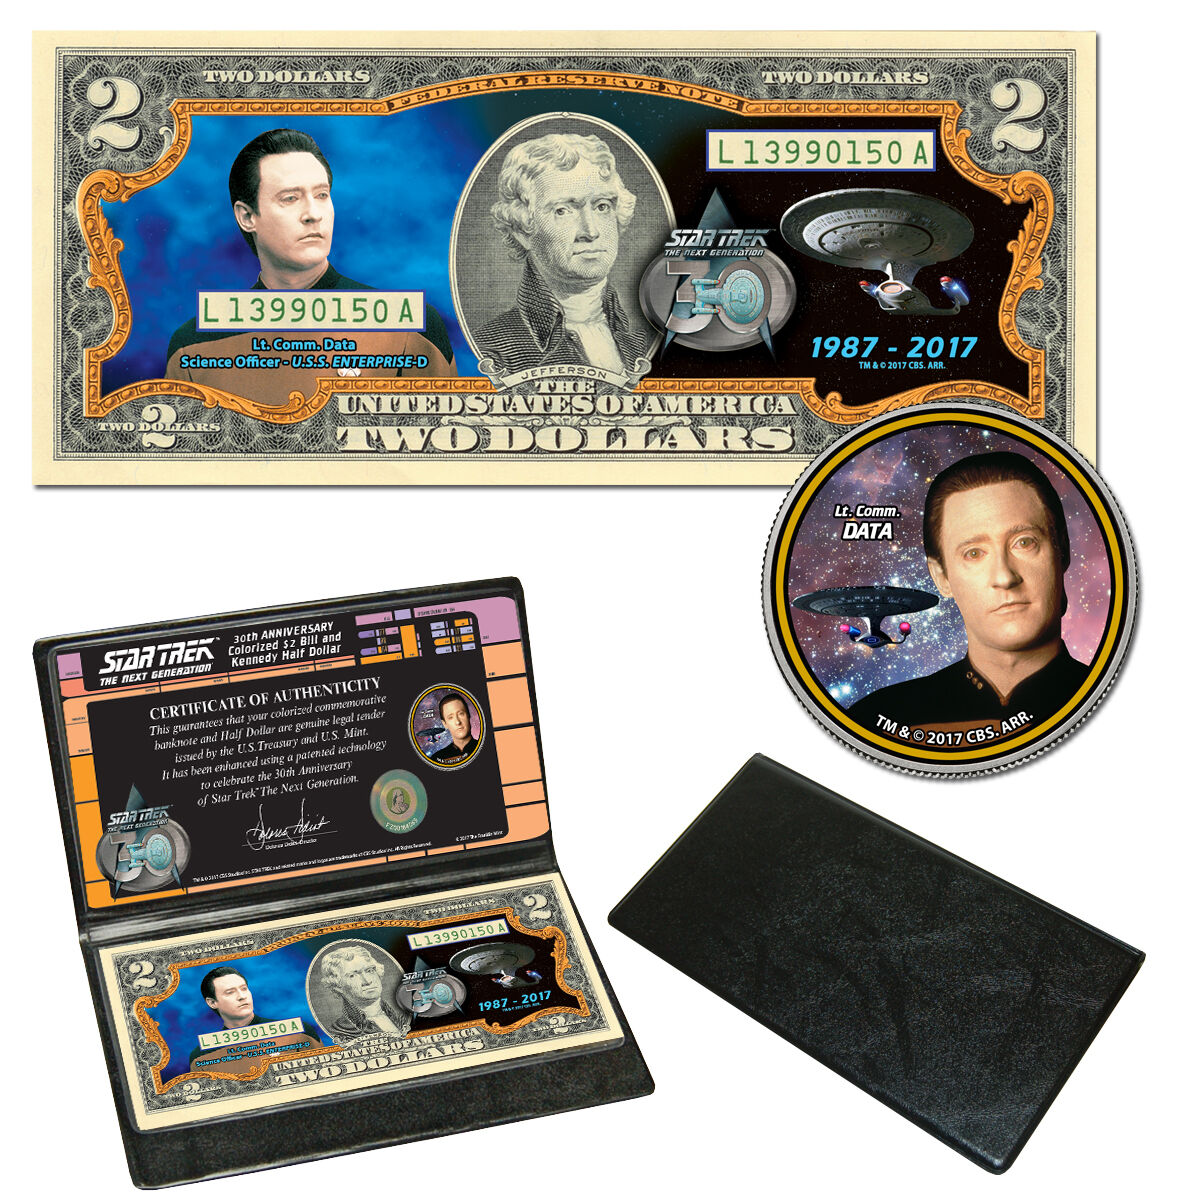  Star Trek: The Next Generation Coin & Currency Collection  - Lt. Comm Data 